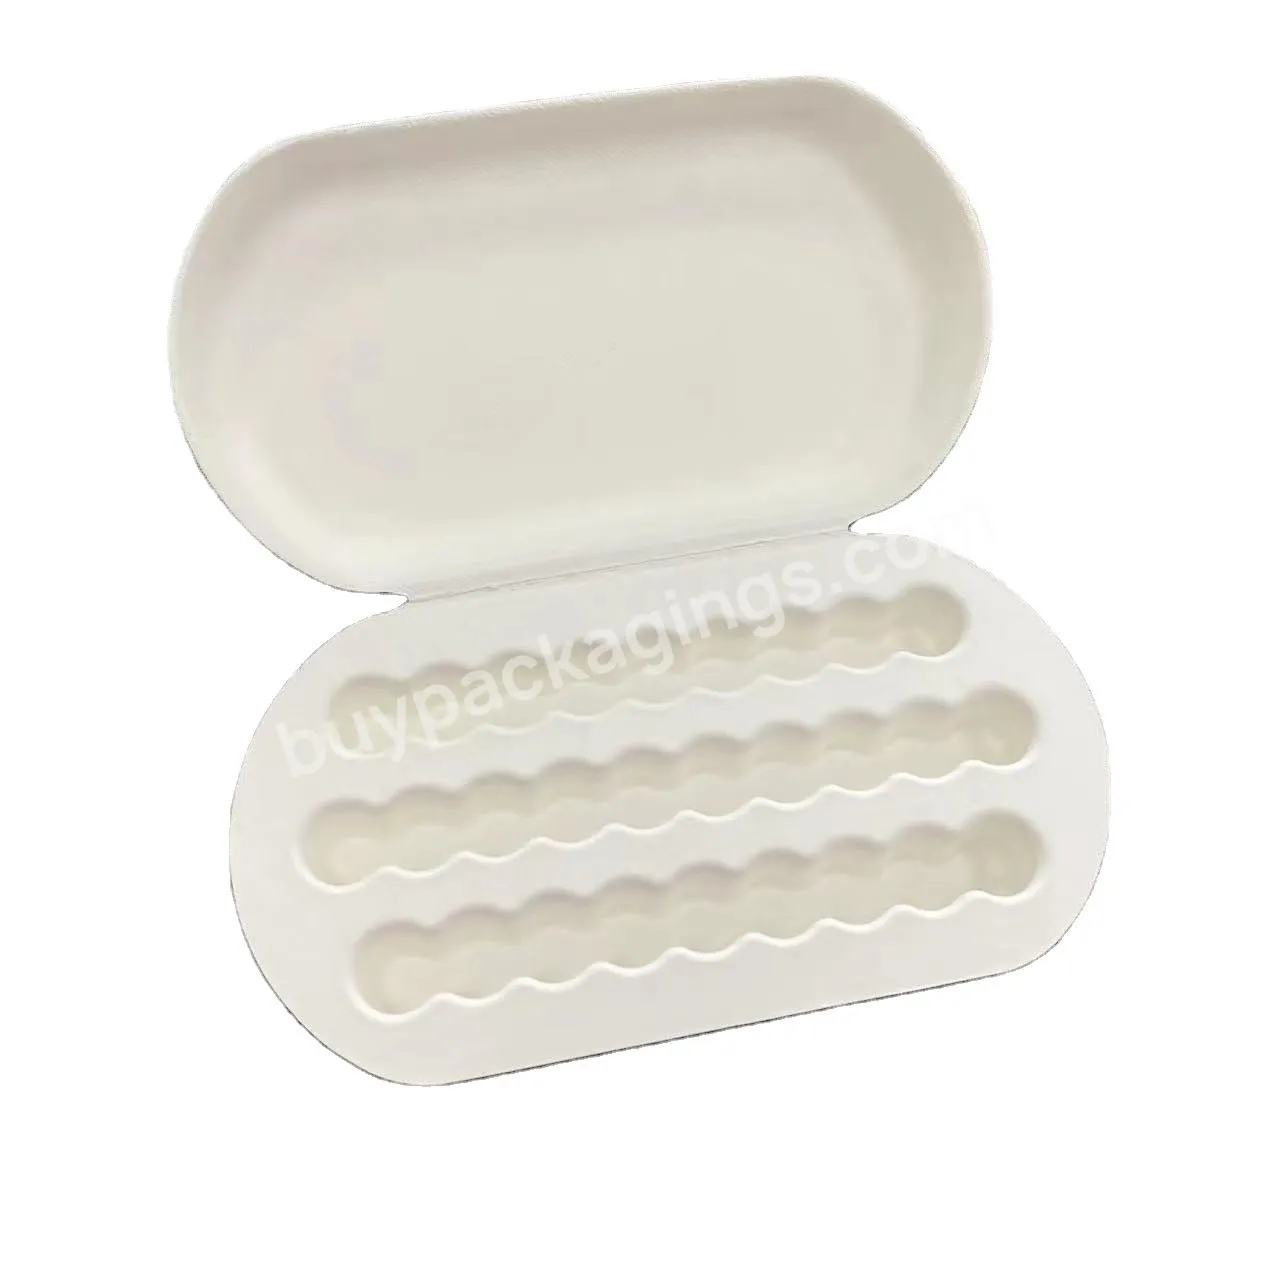 100% Biodegradable Recycled Popular Essence Paper Molded Pulp Whole Set Packaging With Inner Tray - Buy Frisbee Clasp Pulp Box,Bagasse Pulp Packaging,Molded Paper Pulp Box.